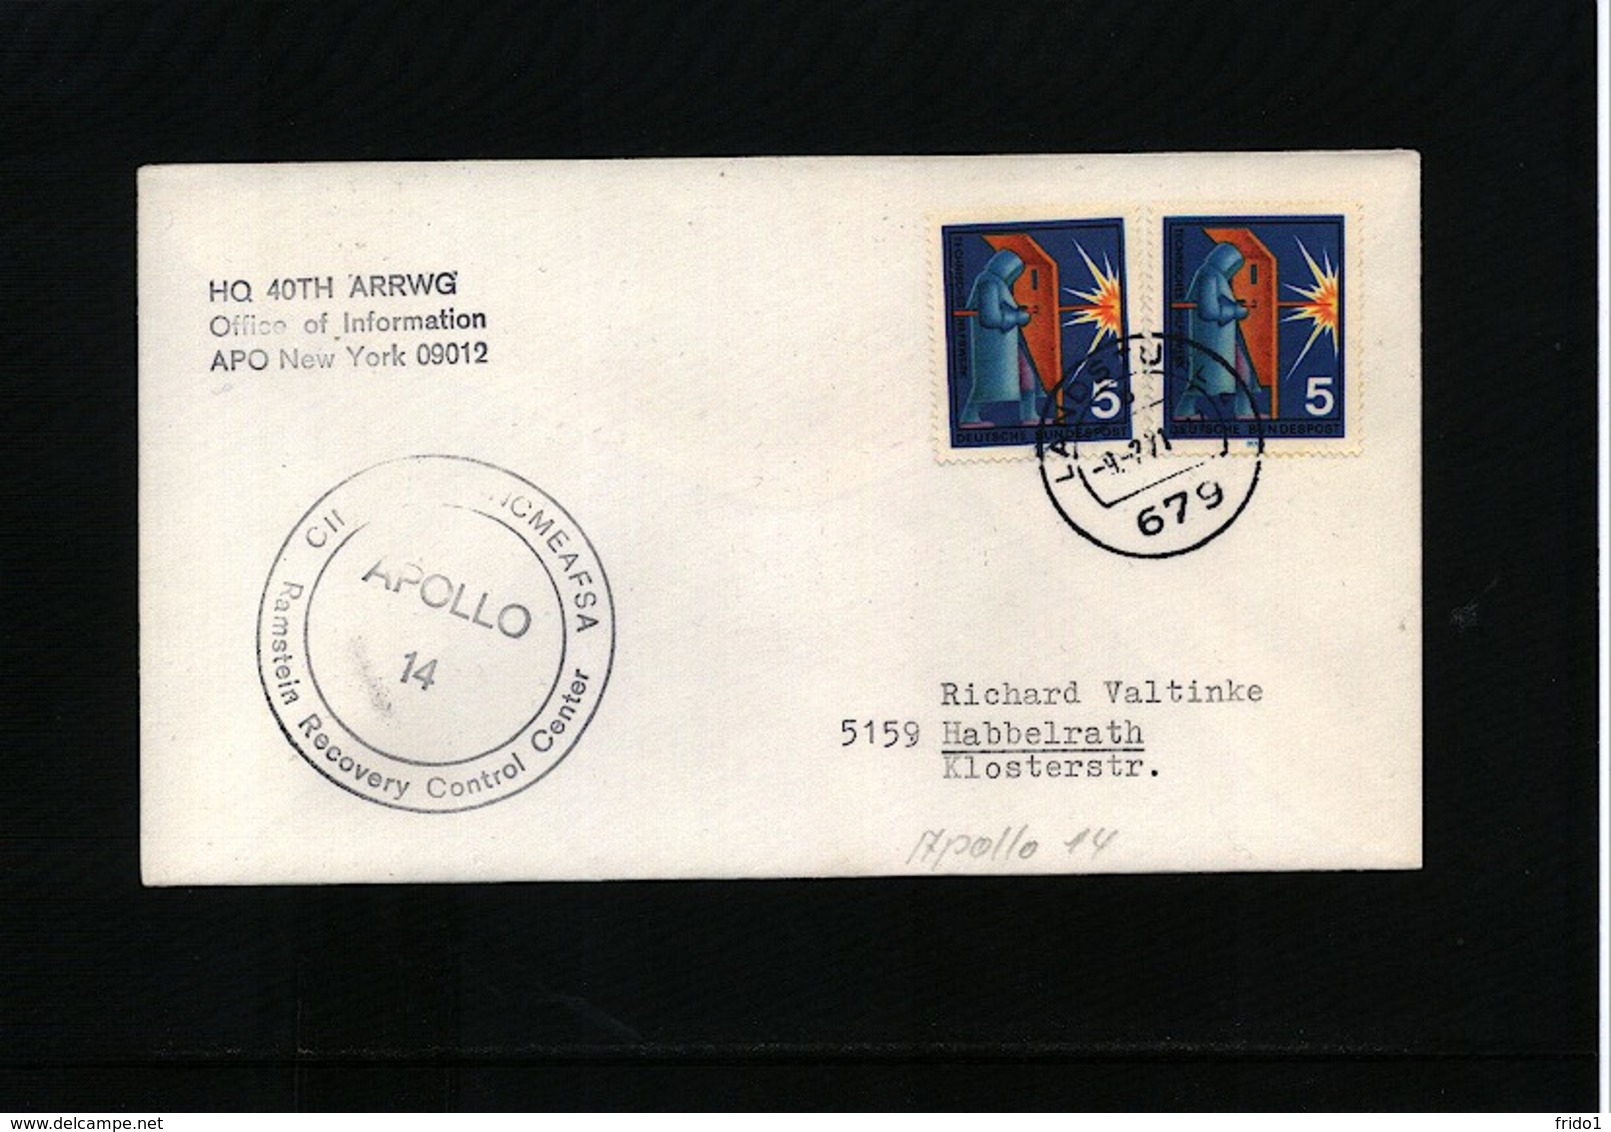 Germany / Deutschland 1971 Space / Raumfahrt Apollo 14 Ramstein Recovery Control Center Interesting Cover - Europa